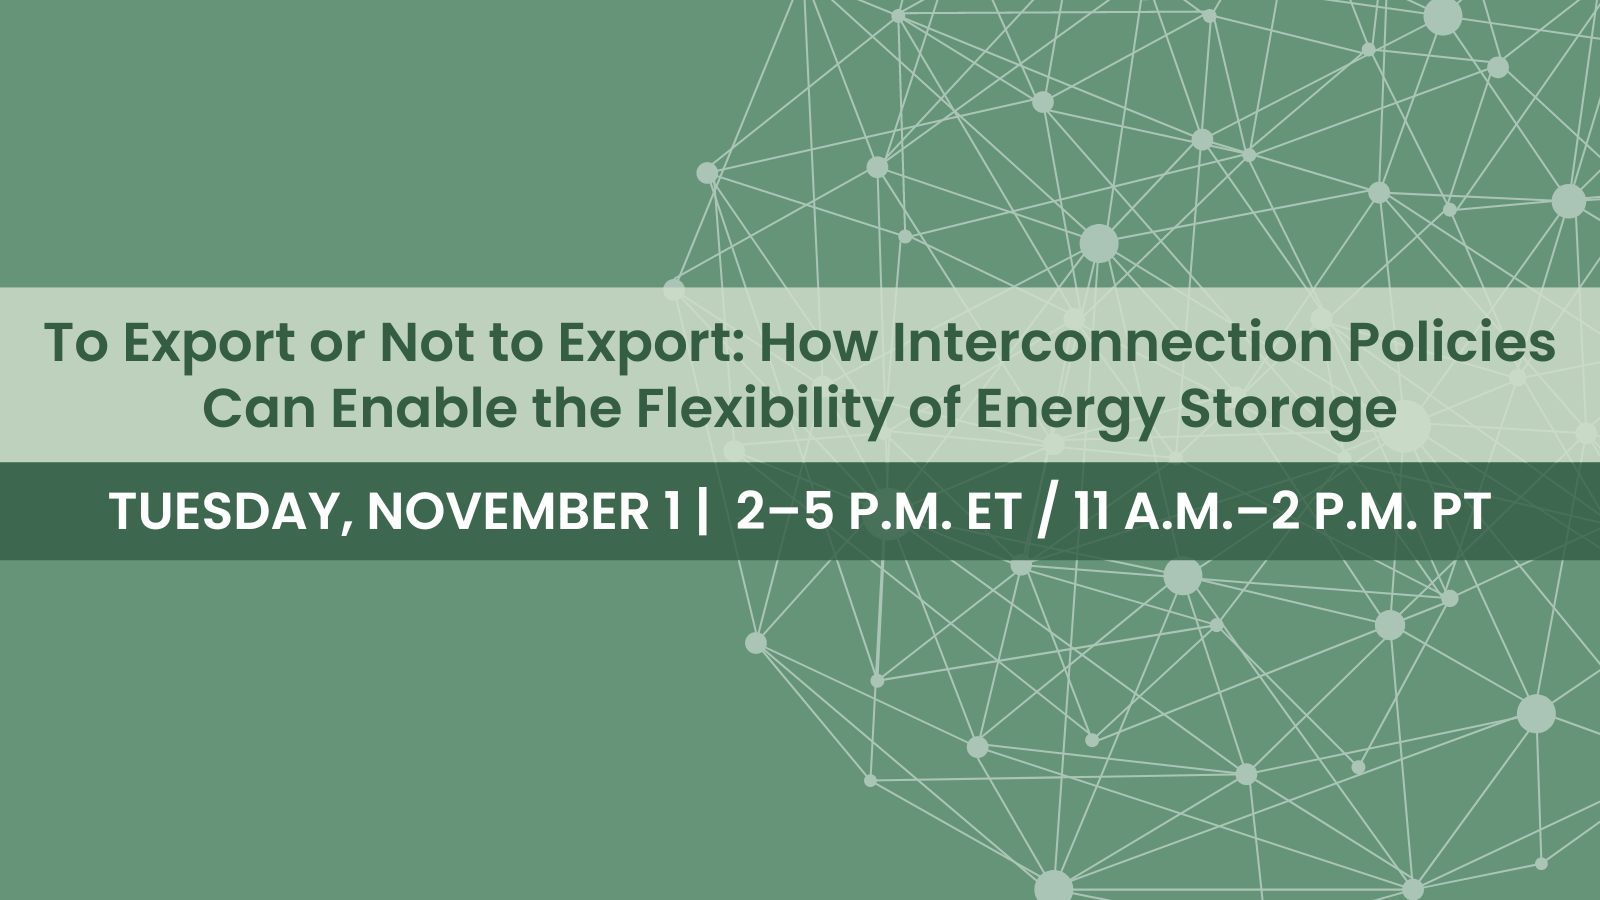 To Export or Not to Export: How Interconnection Policies Can Enable the Flexibility of Energy Storage Workshop